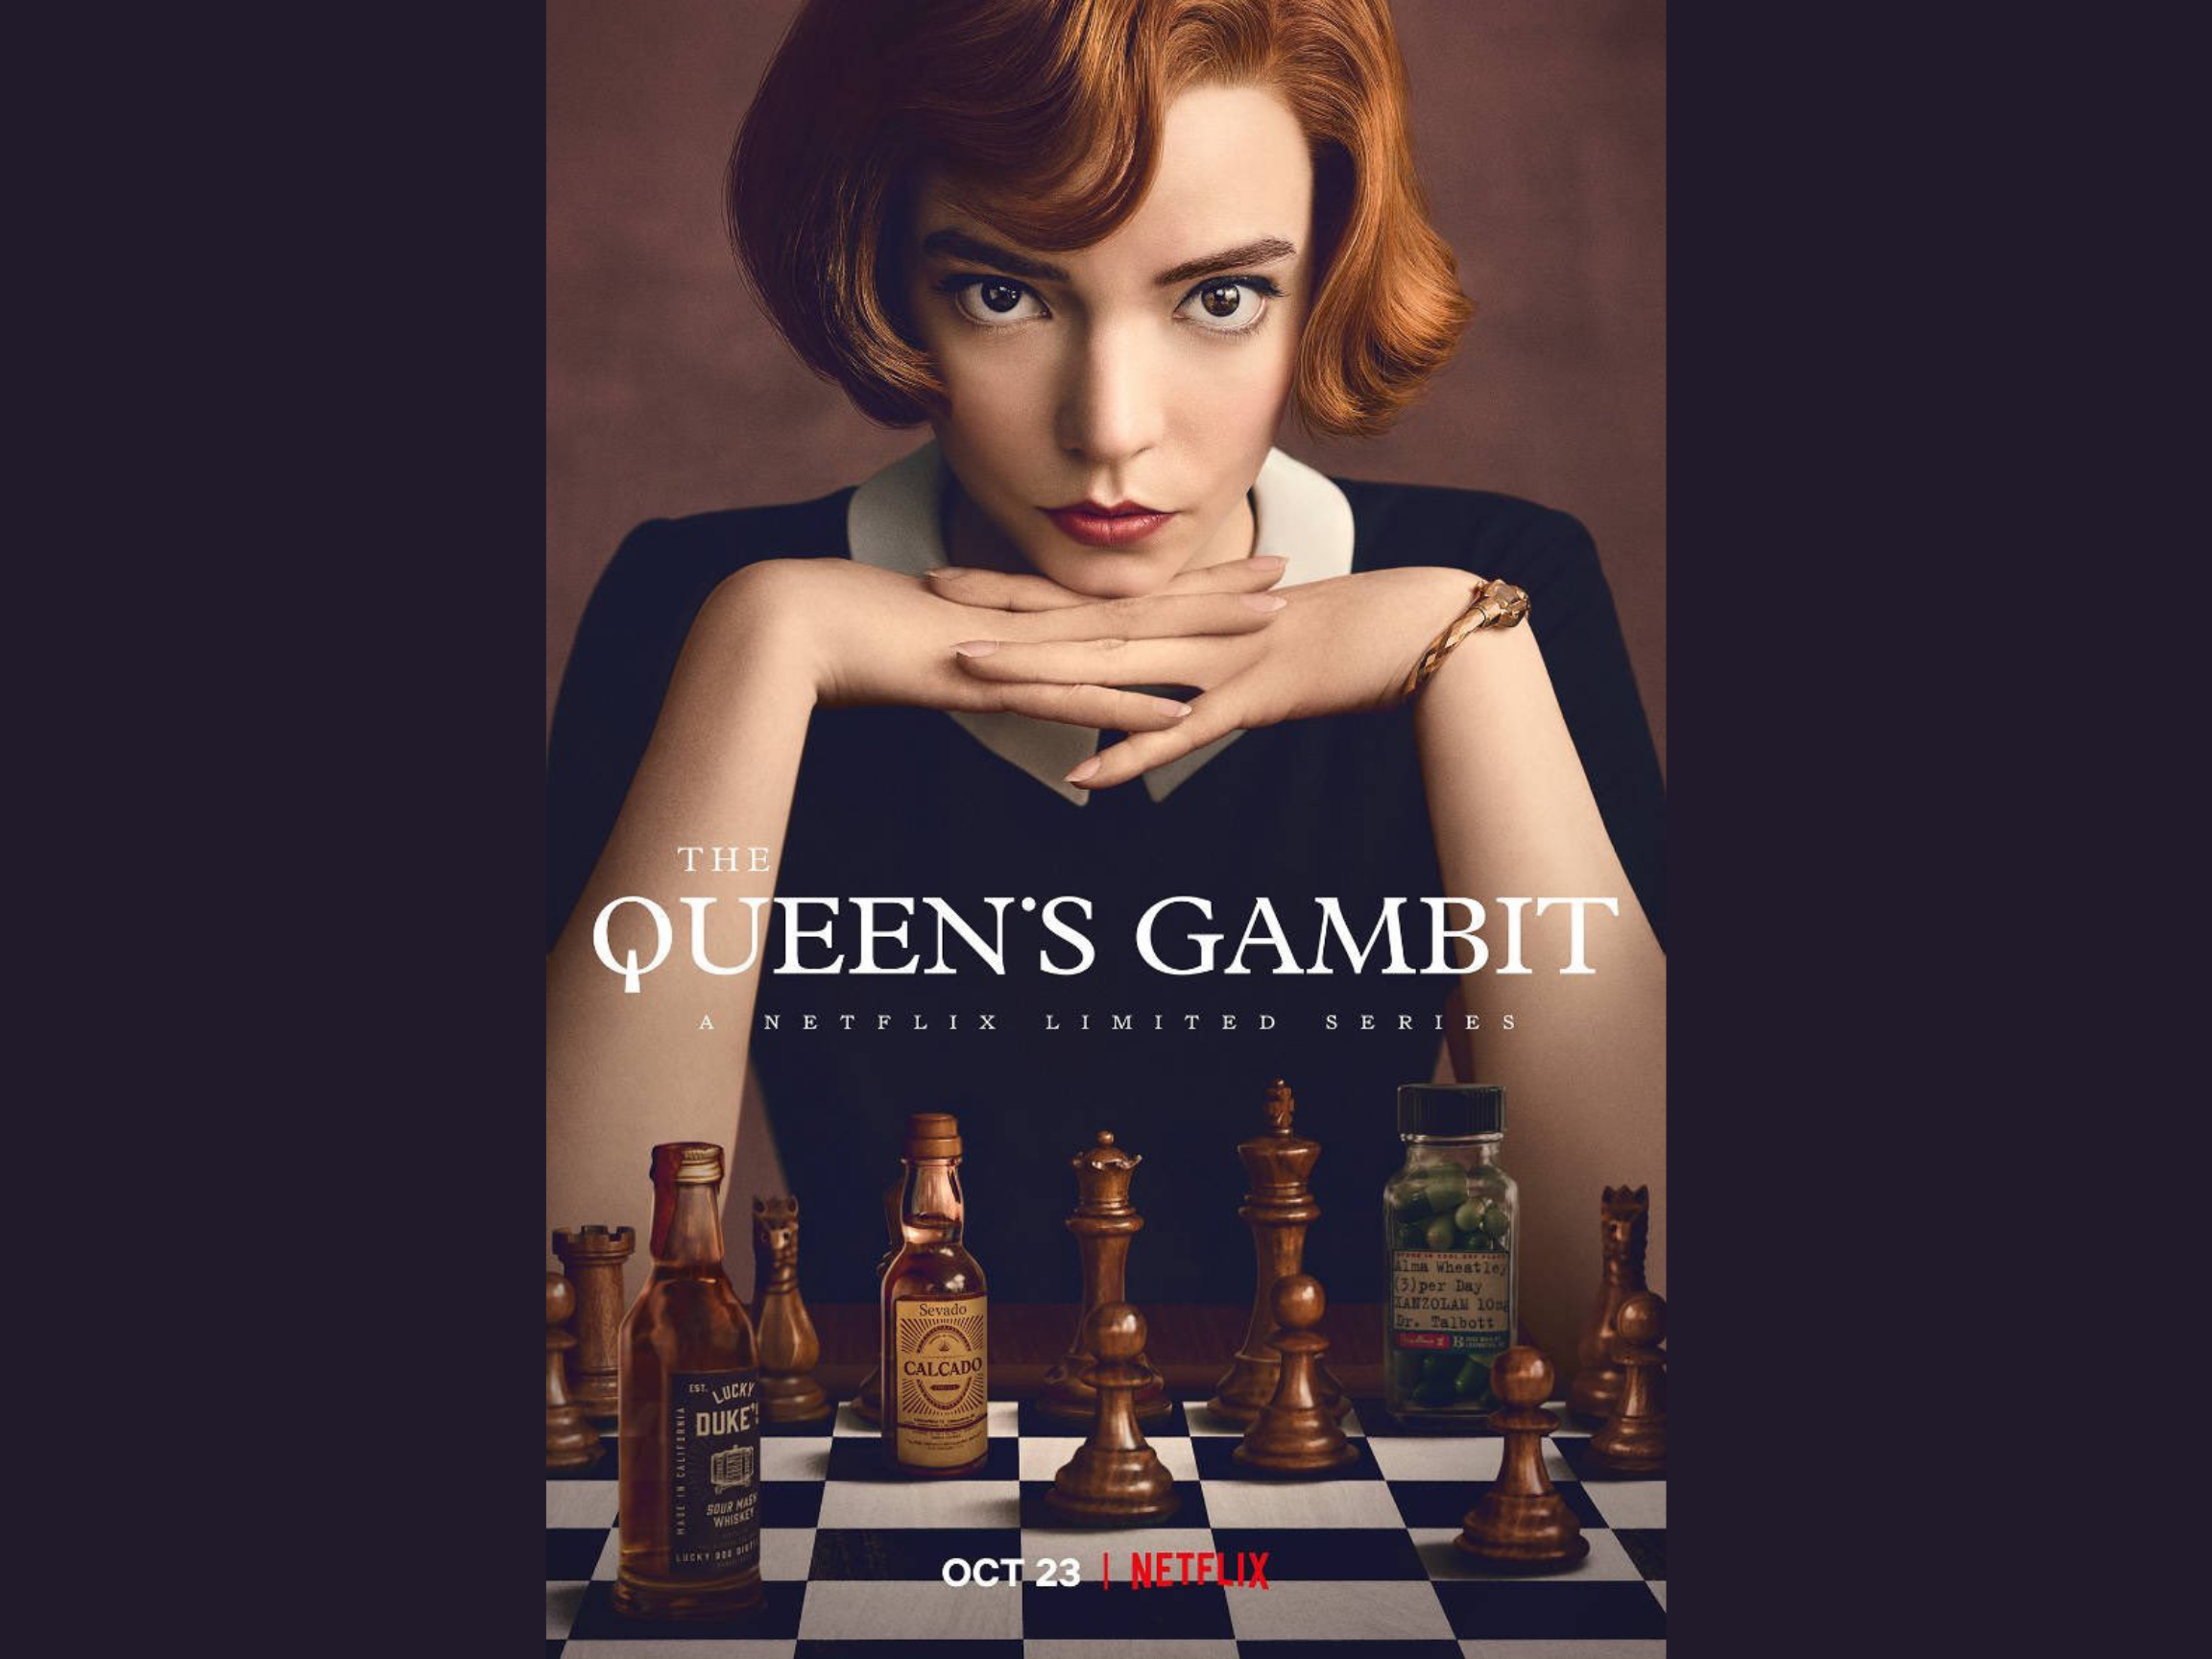 The Queen's Gambit: Why Beth Ending Up Single Was The Best Choice